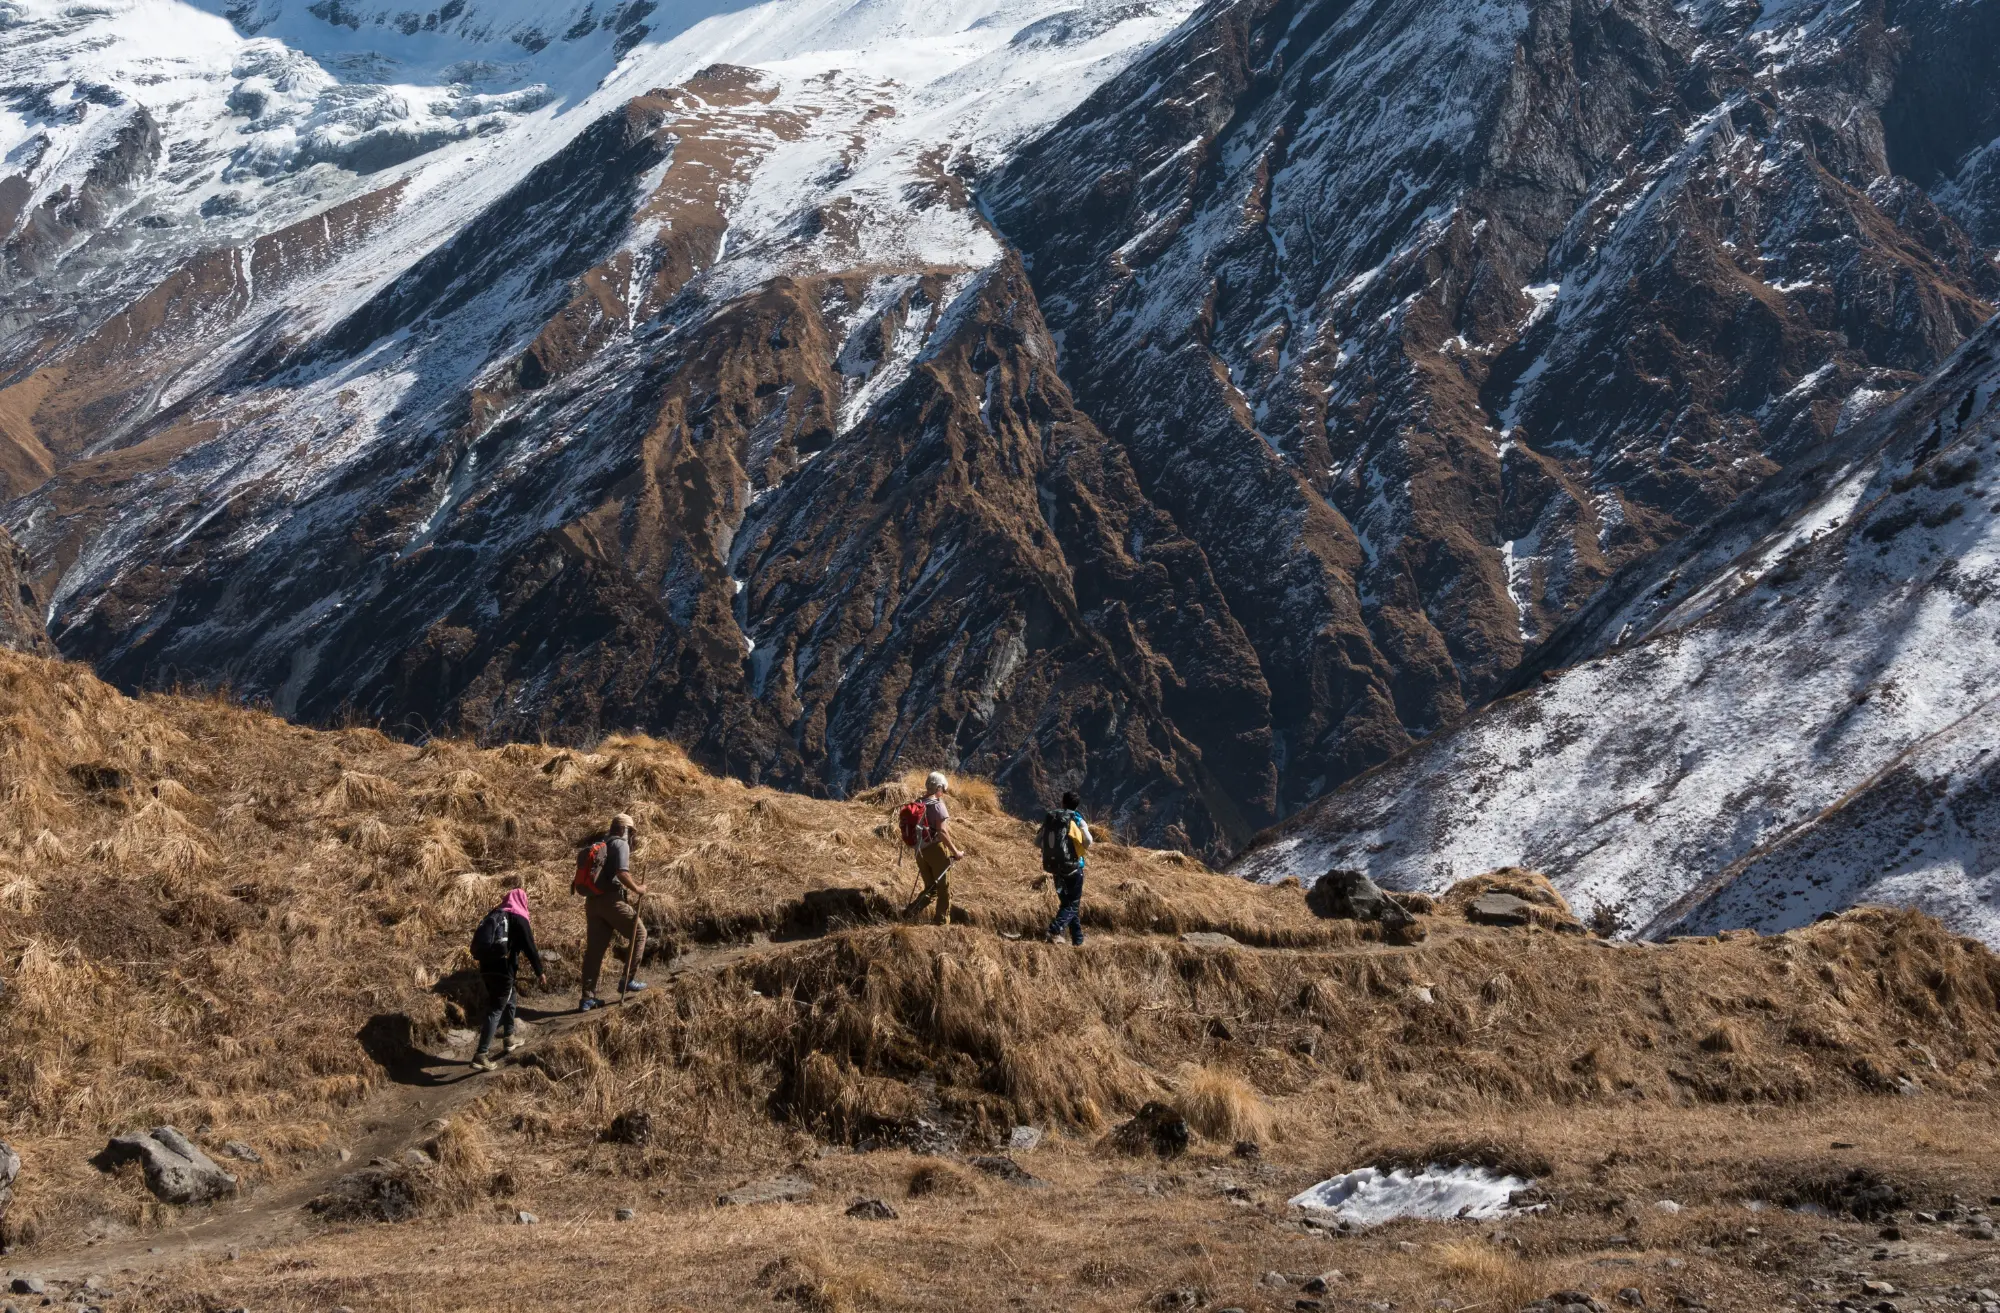 Is a trekking guide required in Nepal?